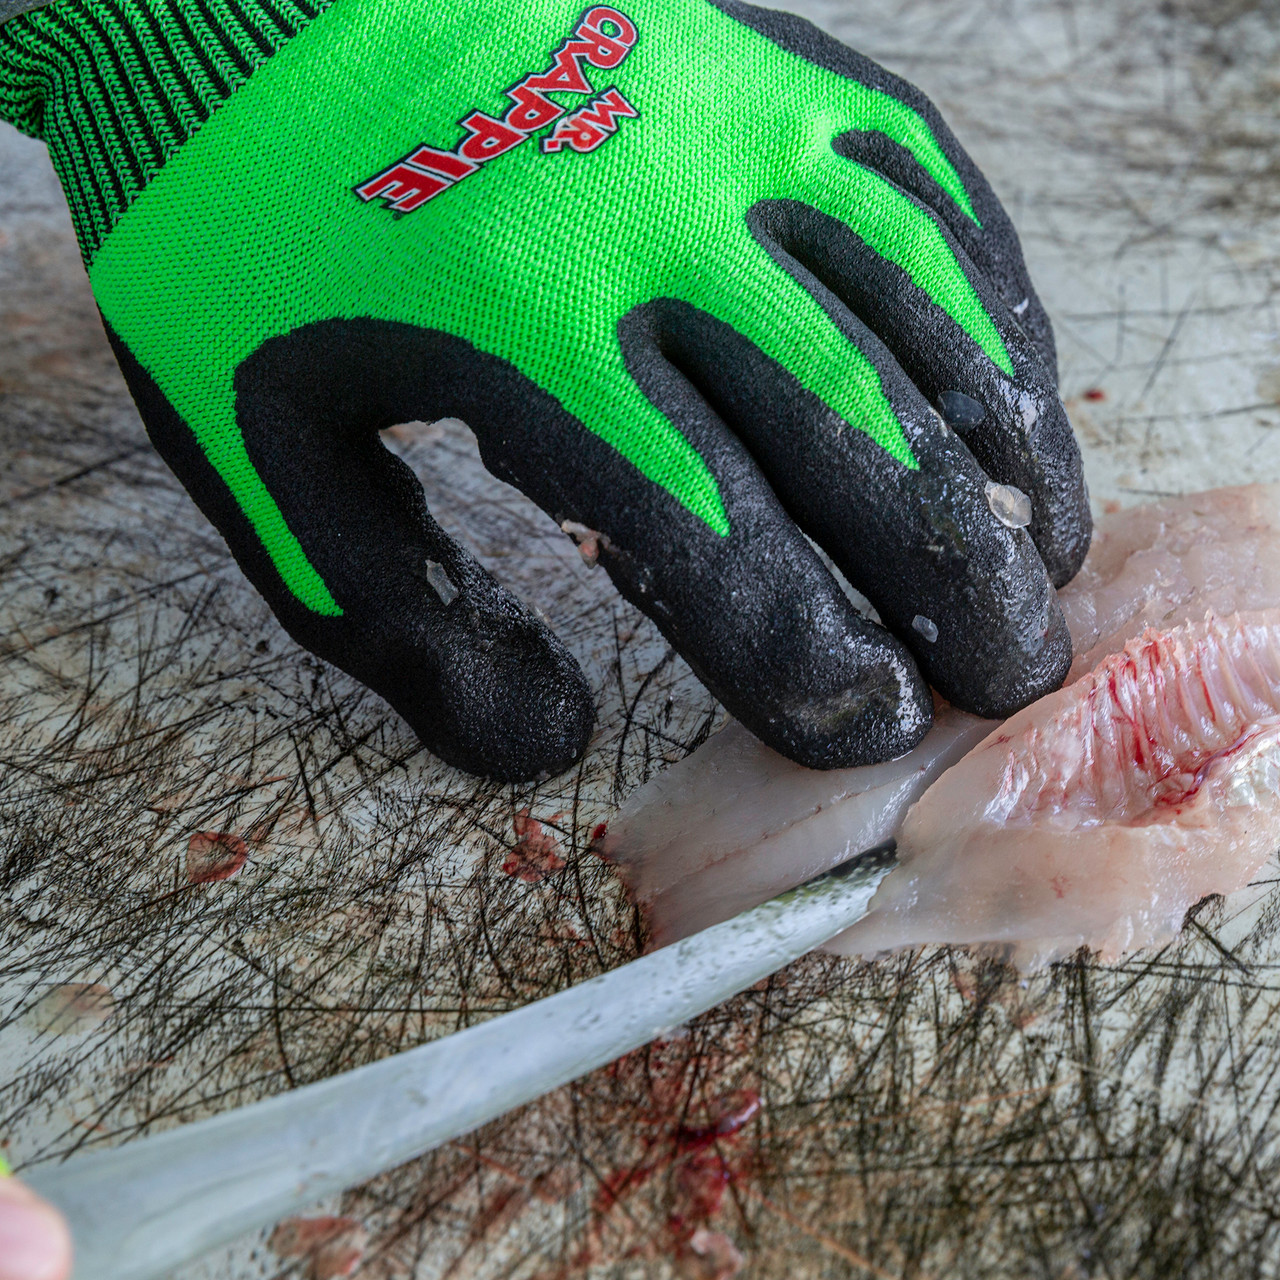 Slab Slanger Cut-Resistant Gloves - Smith's Consumer Products